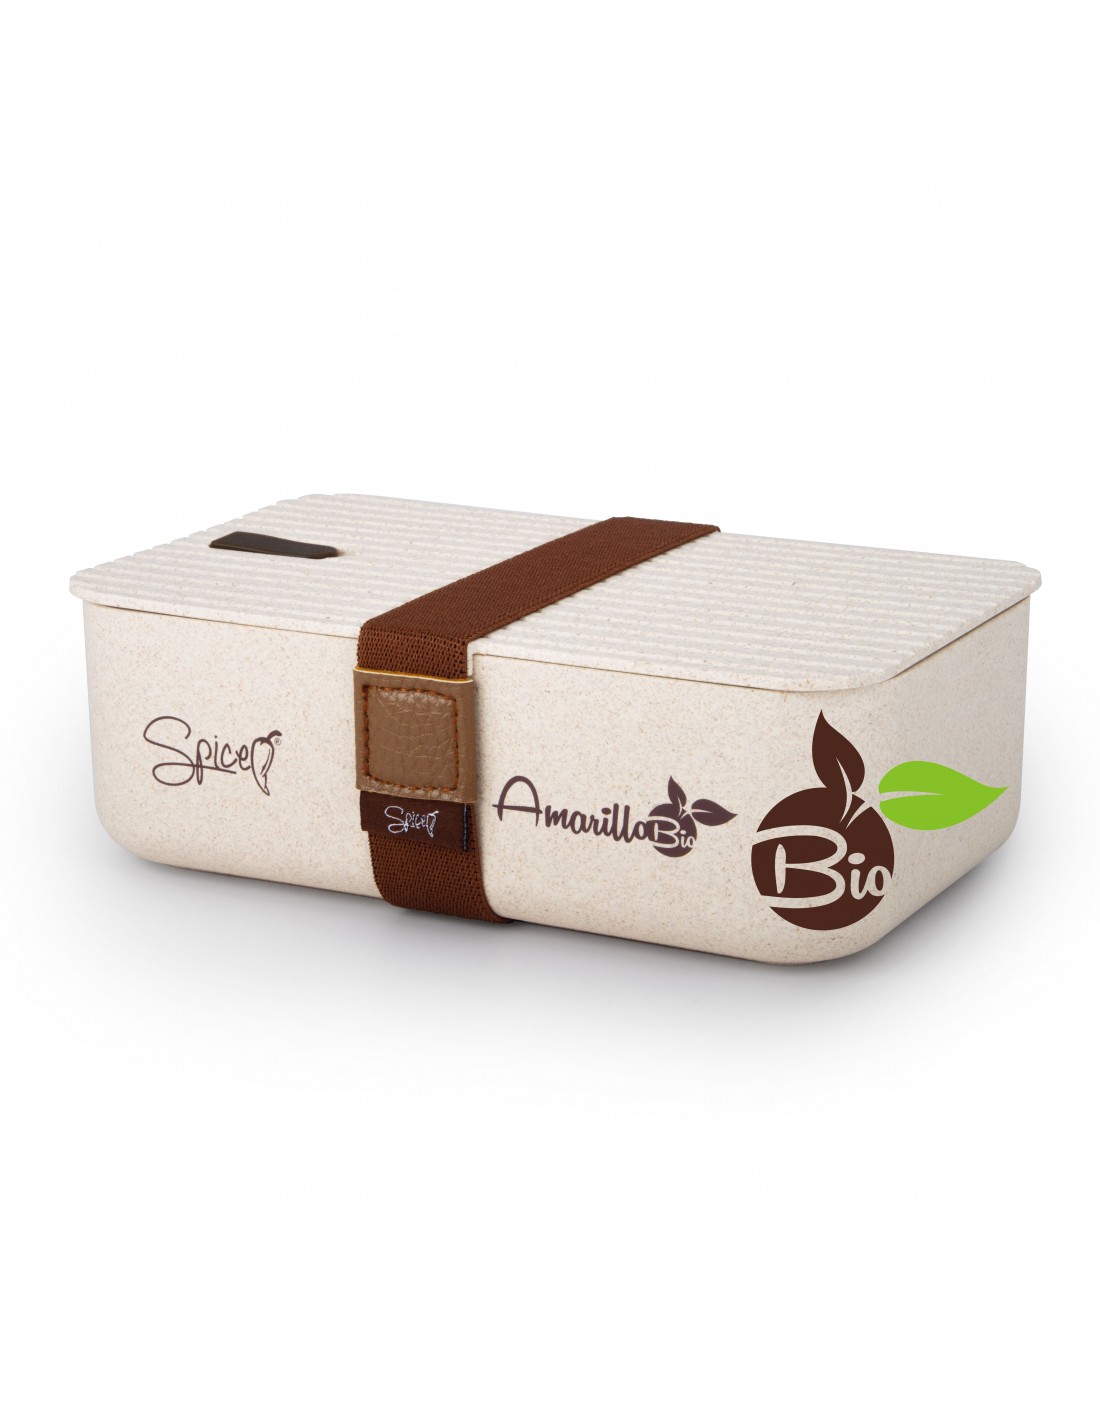 https://www.spice-electronics.com/1729-thickbox_default/amarillo-bio-bento-box-lunch-box-in-ecological-material.jpg